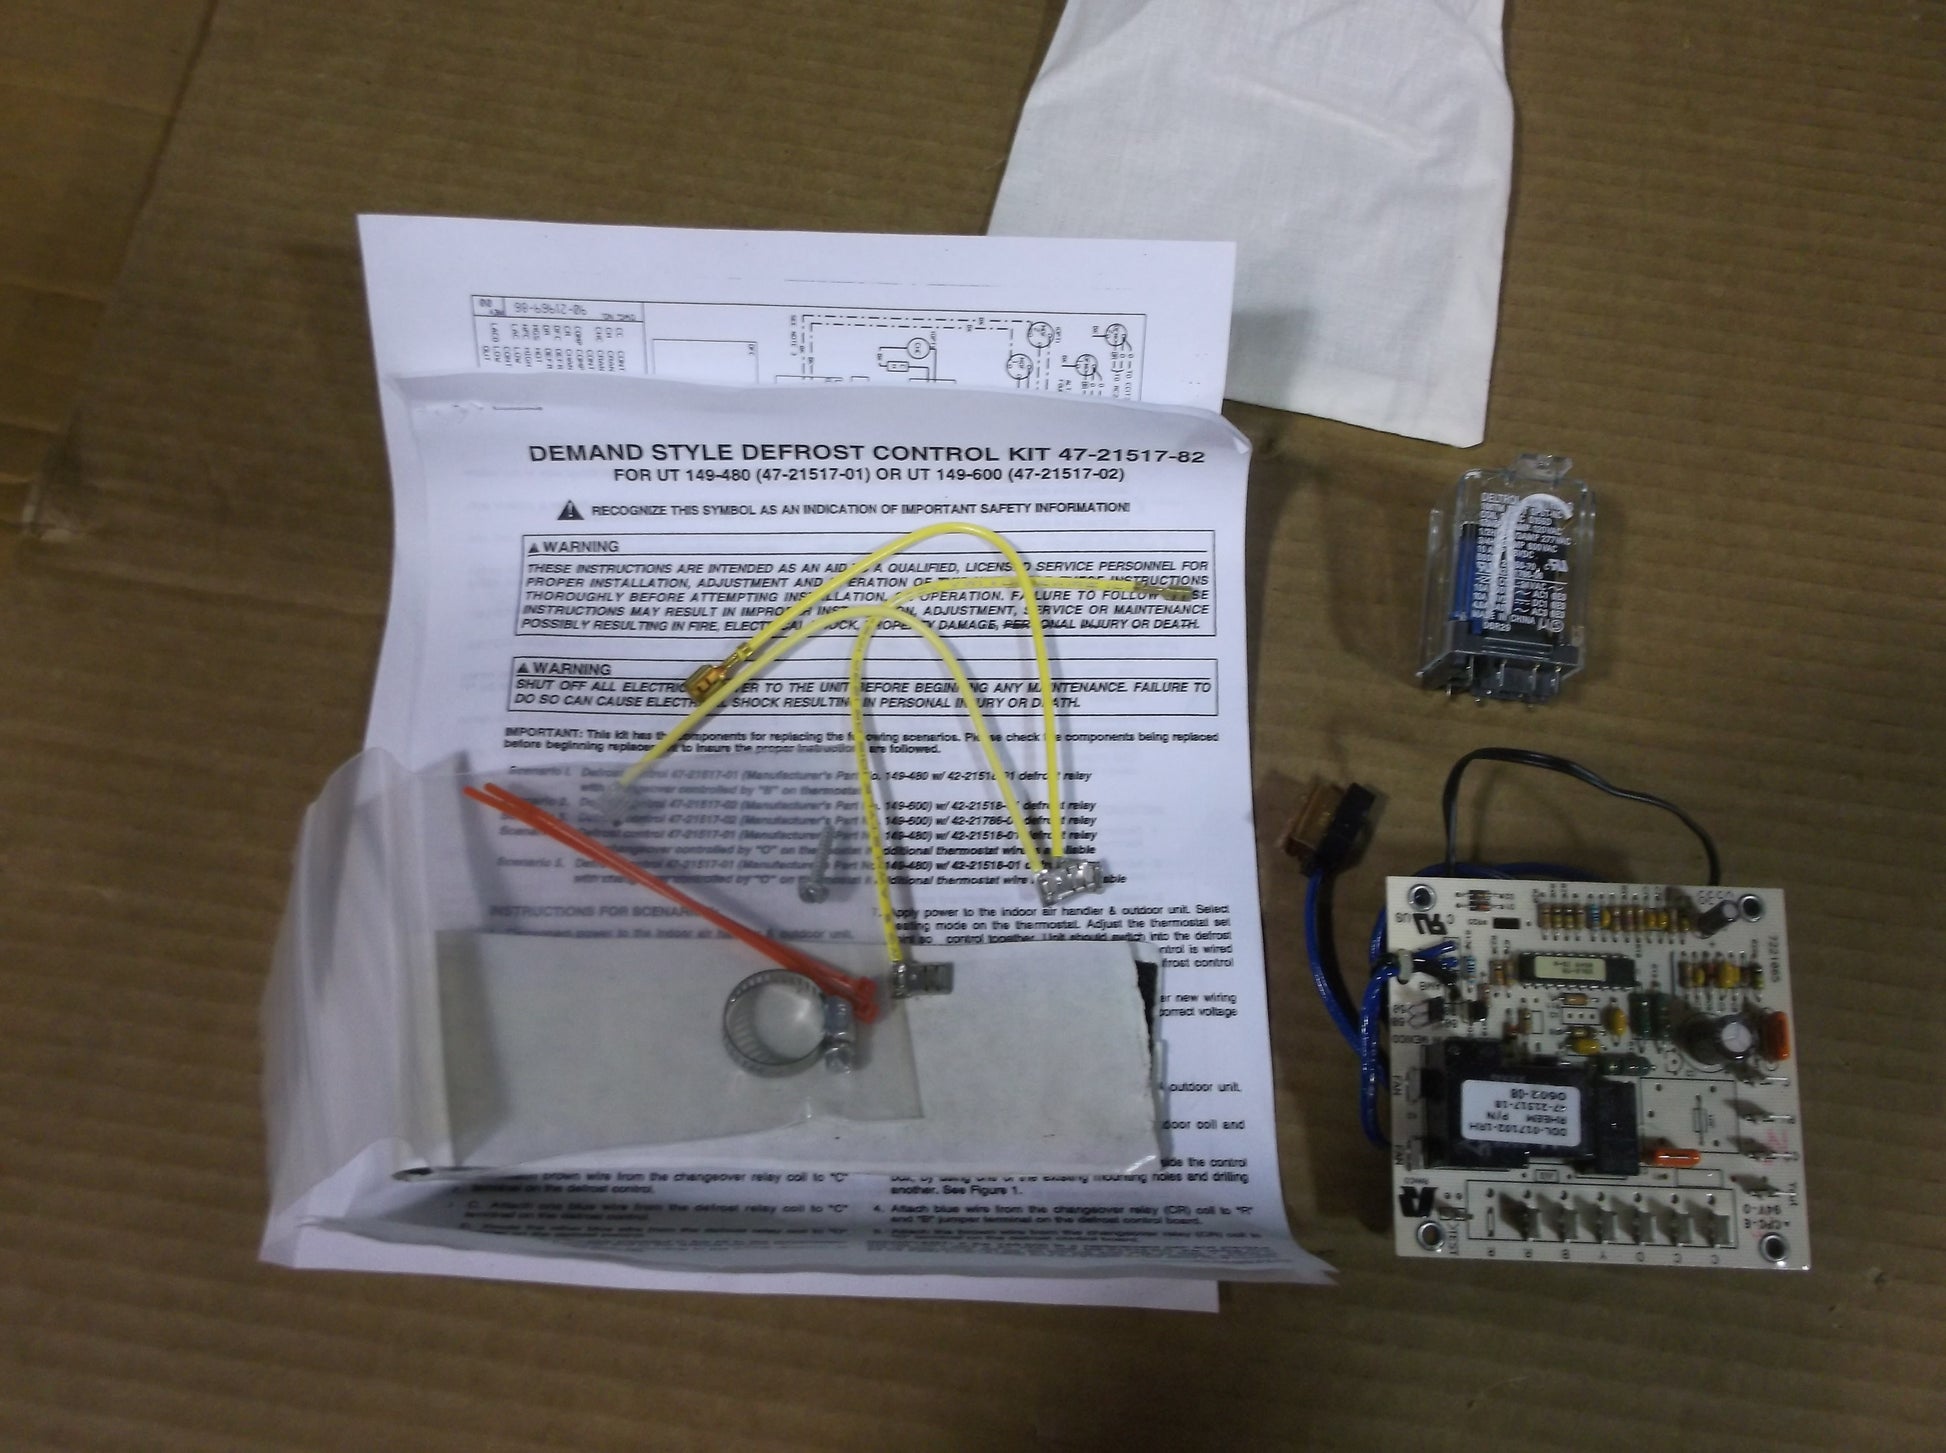 DEMAND STYLE DEFROST CONTROL BOARD KIT